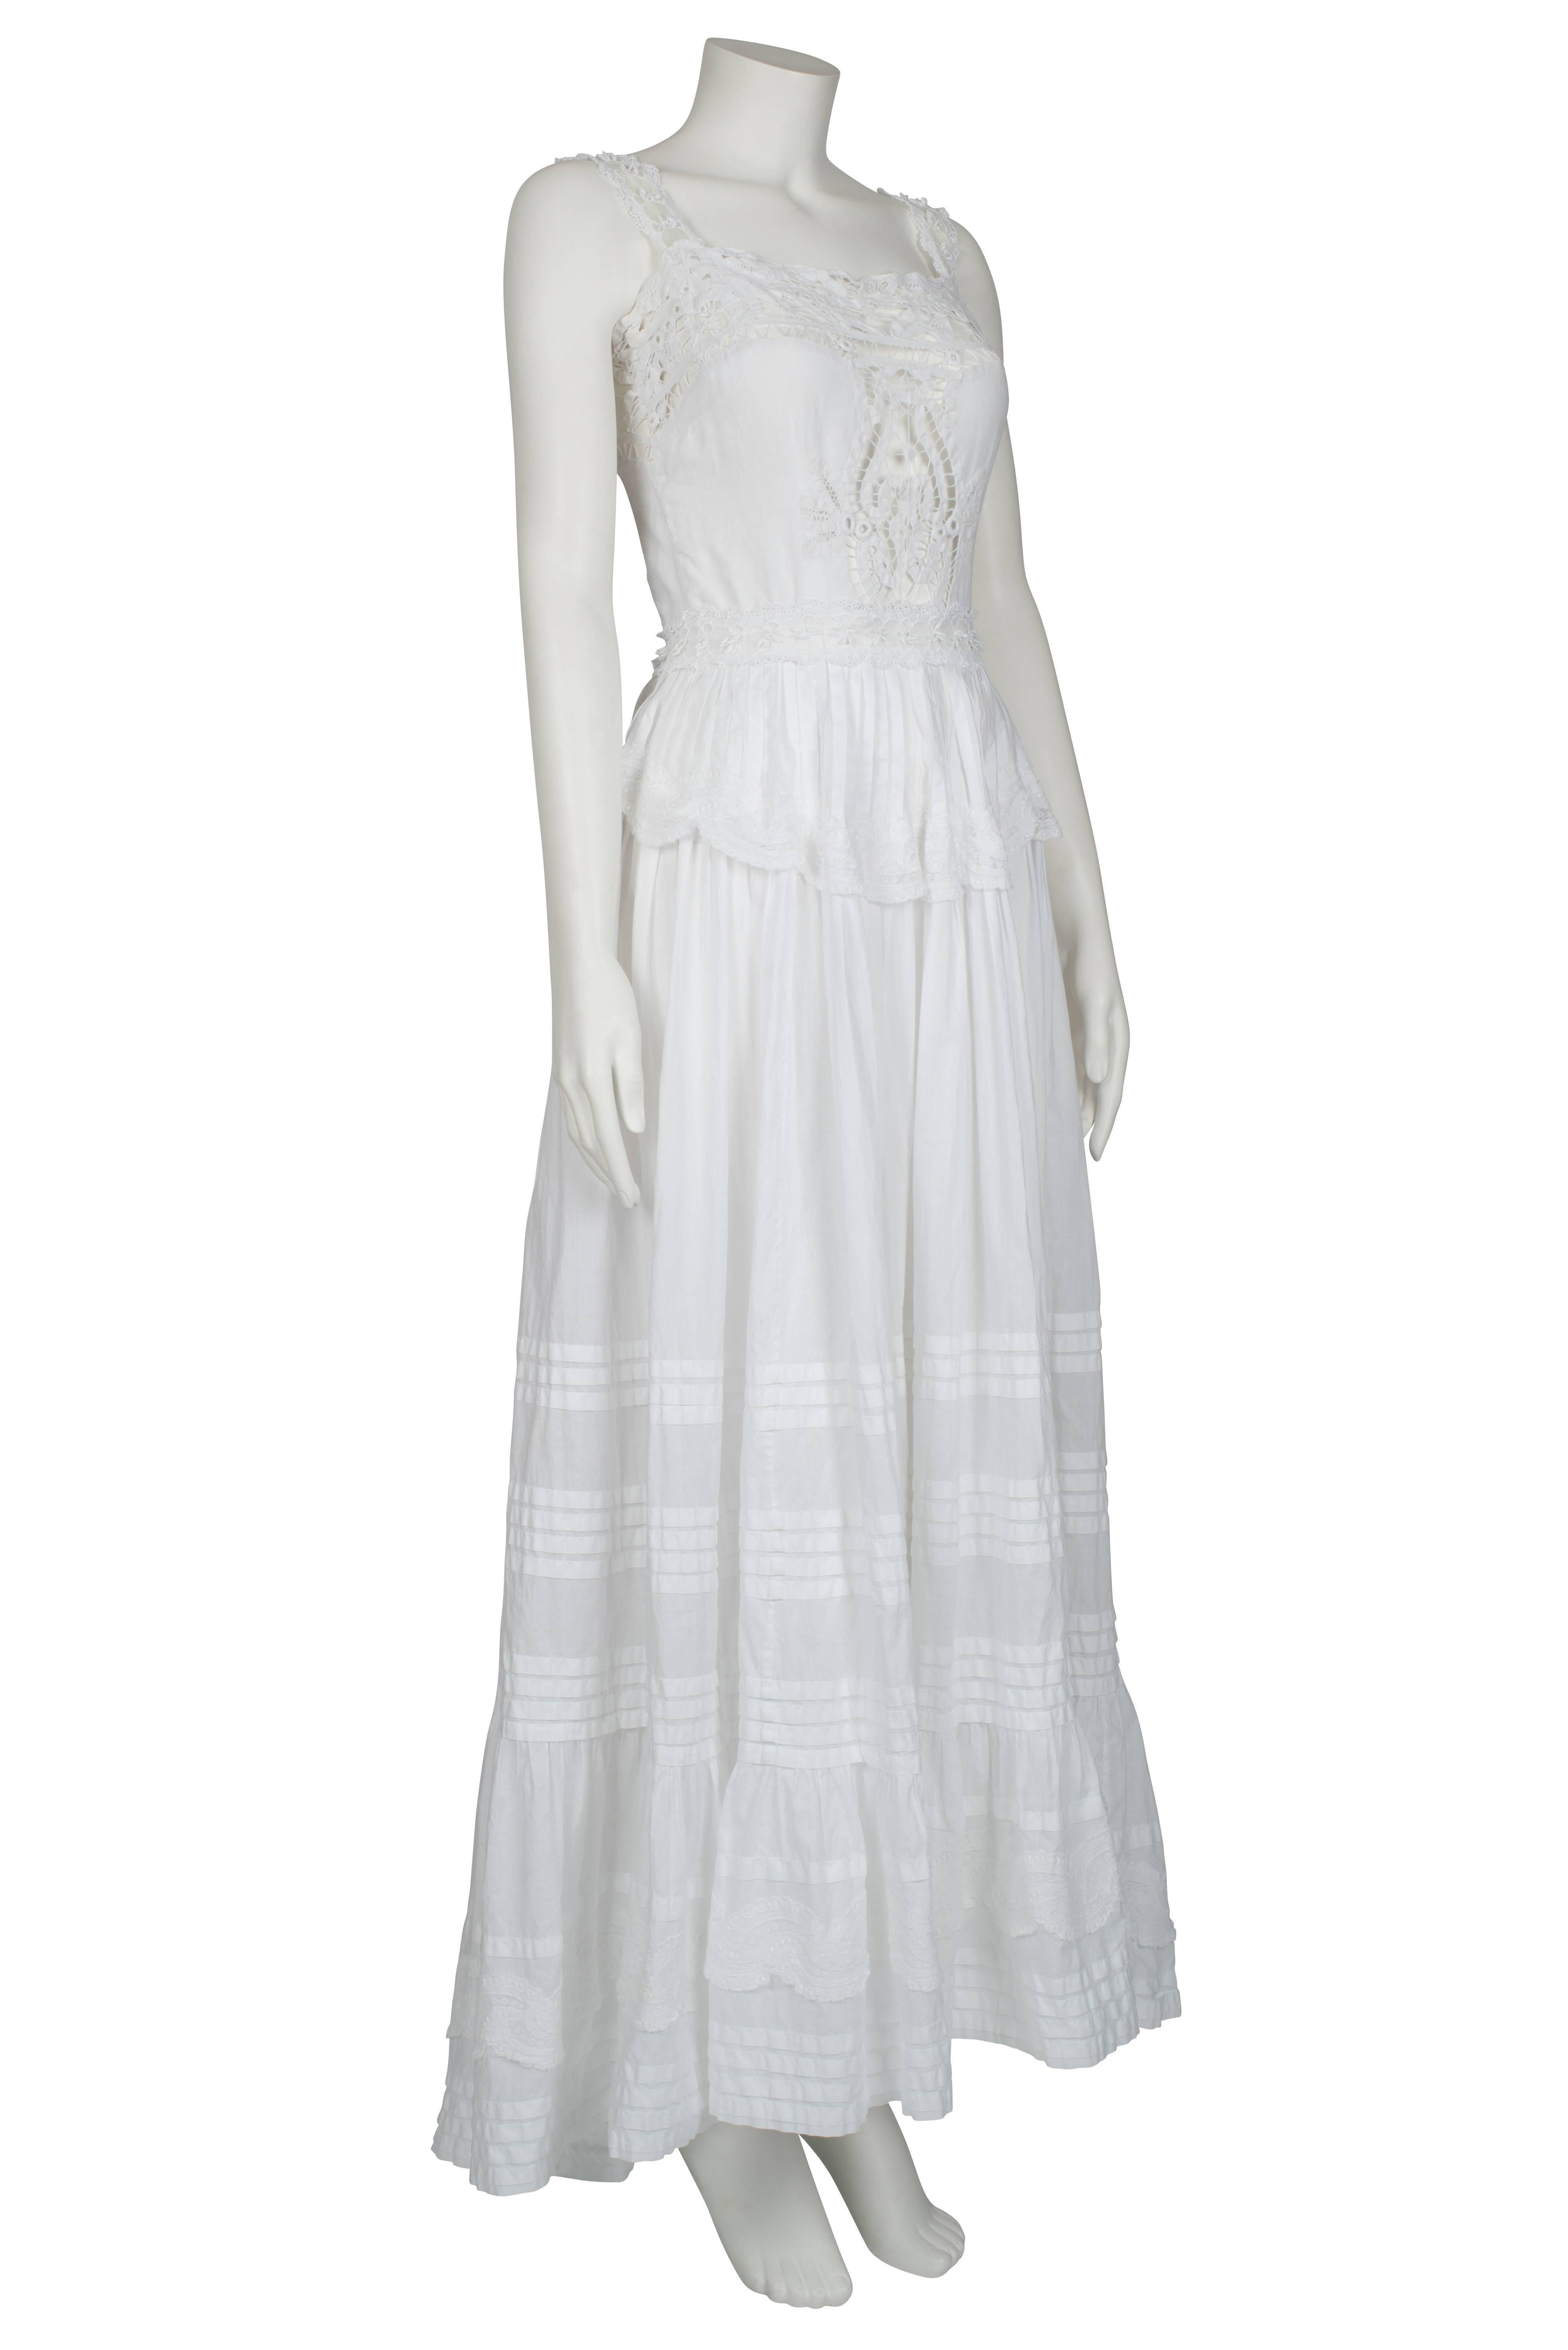 Theodora van Runkle Designed 'Victorian Style' Dress ca 1970 In Excellent Condition For Sale In London, GB